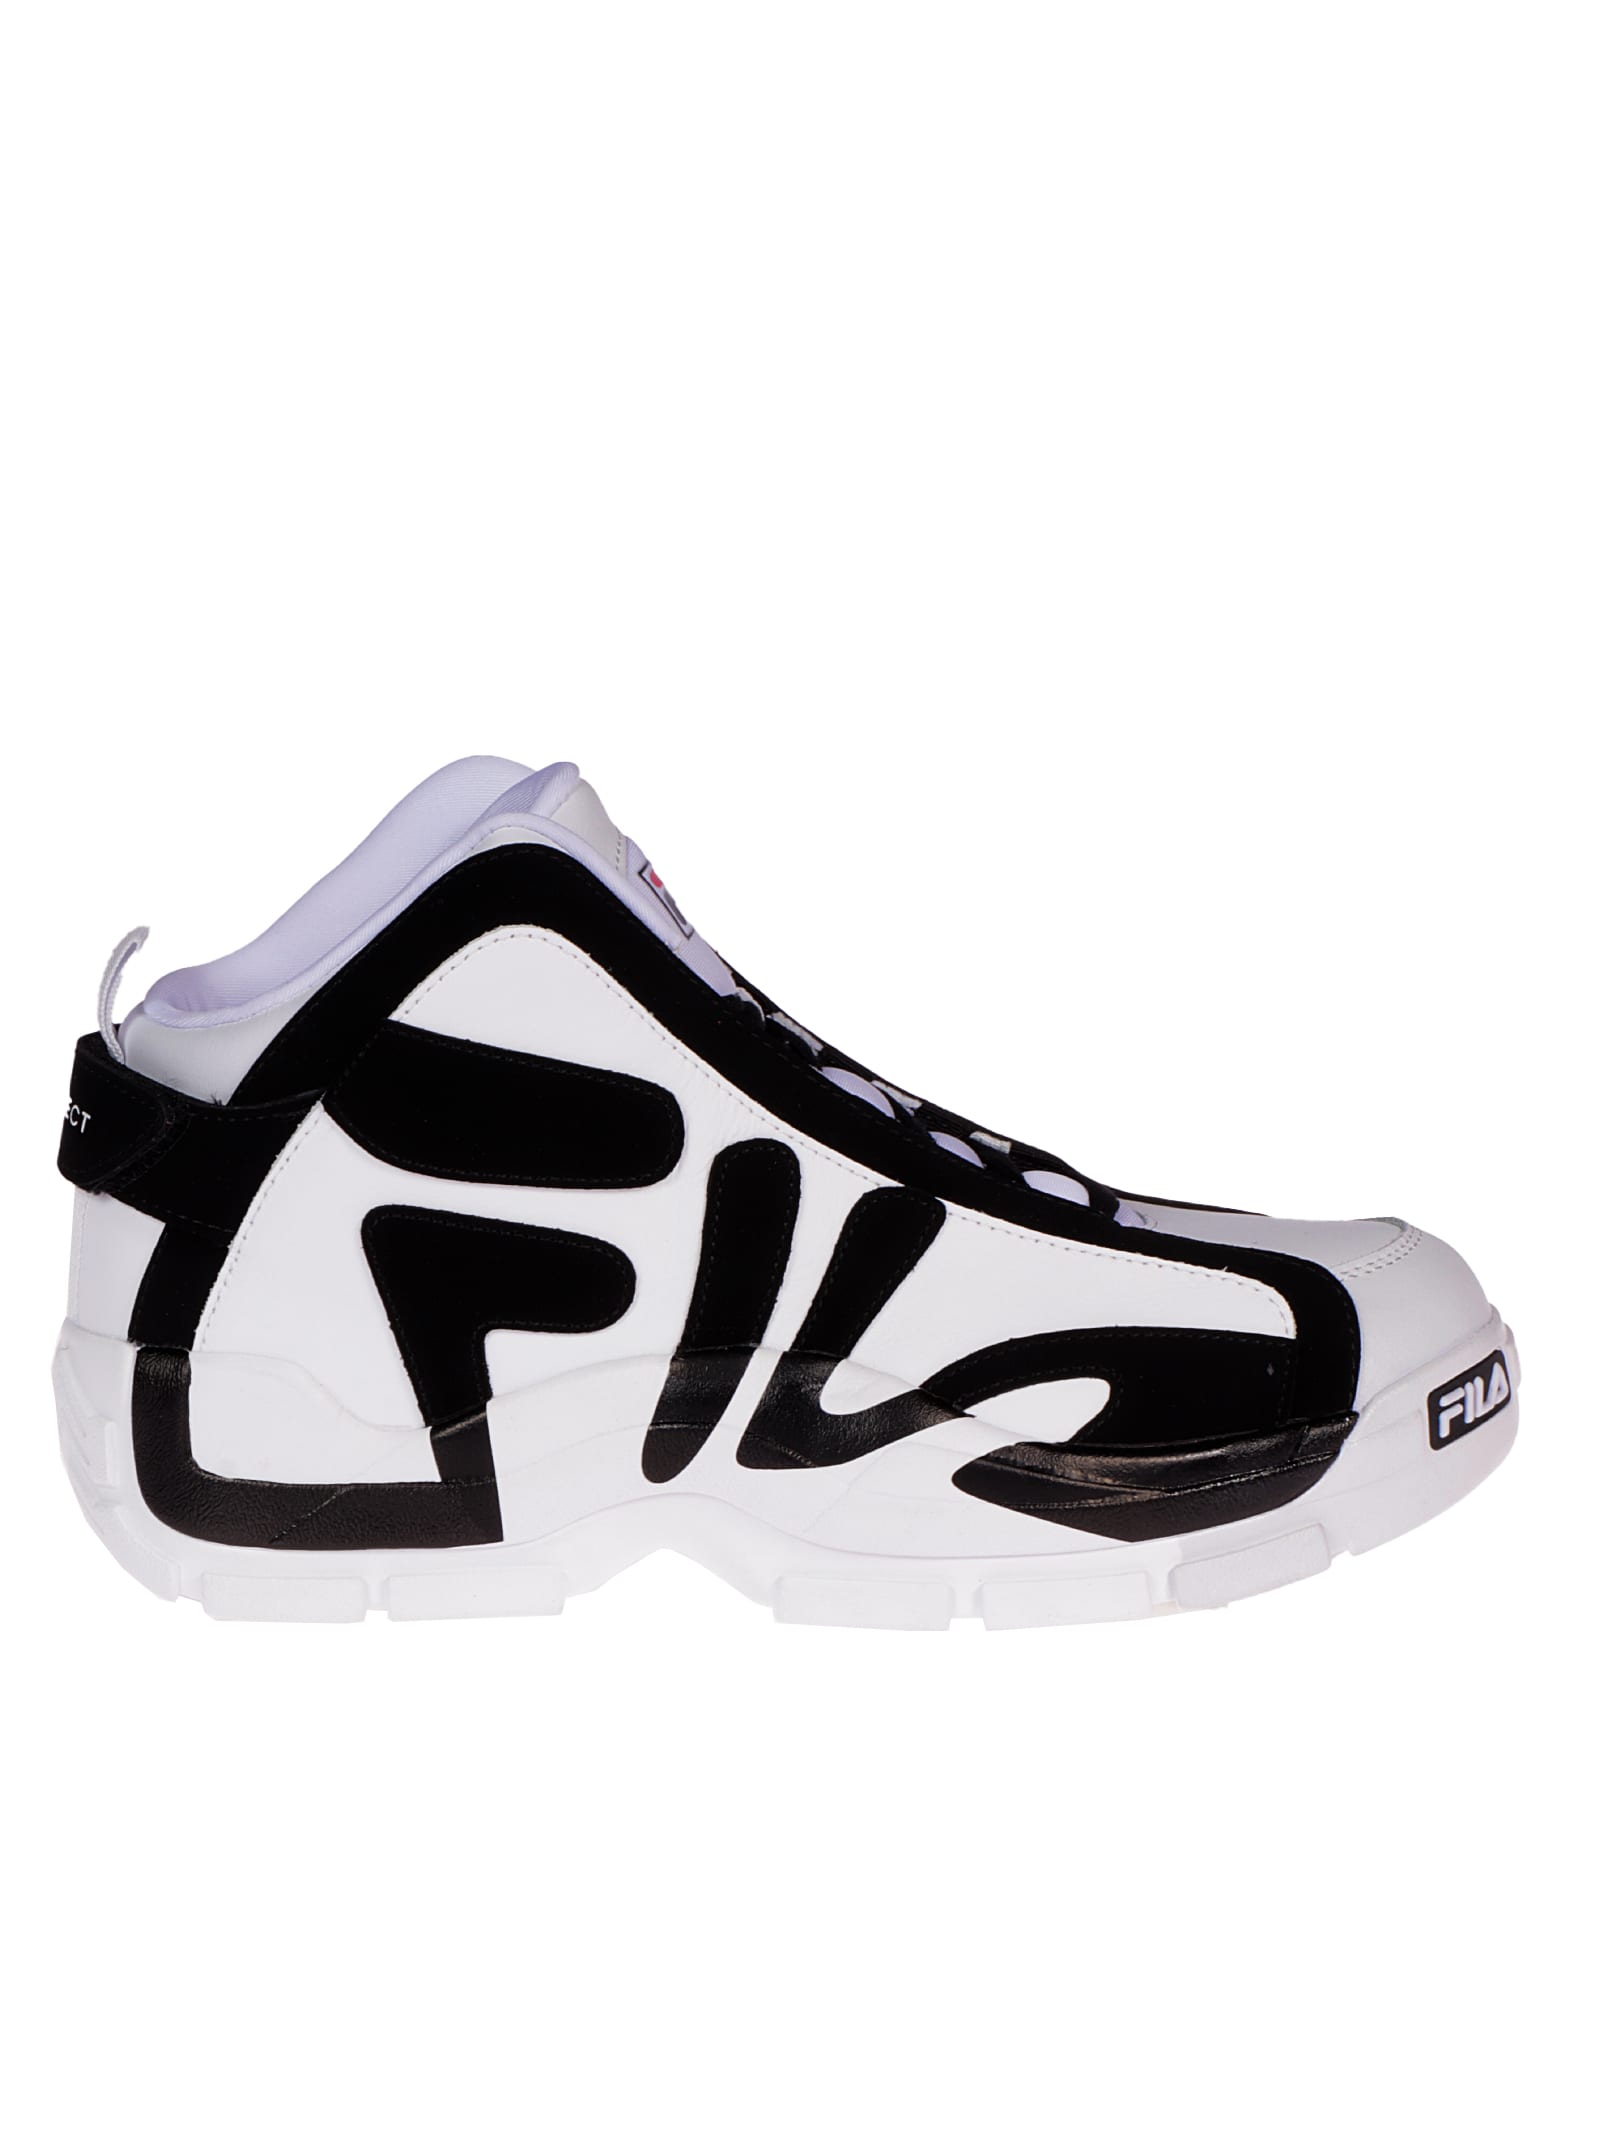 Y/Project Fila Yp Grant Hill